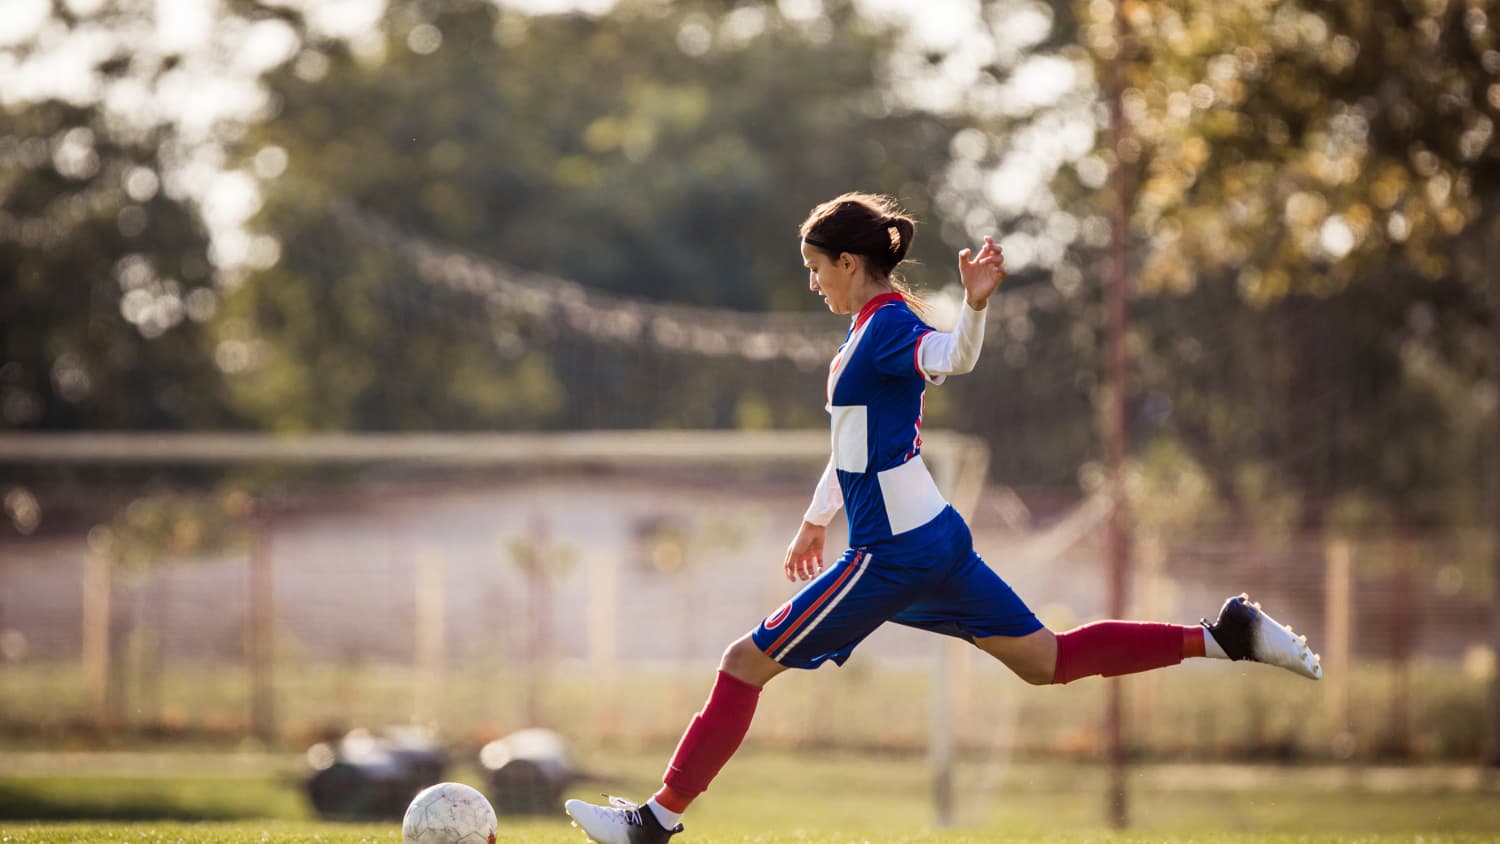 Do pro sports have specific rules preventing women from playing